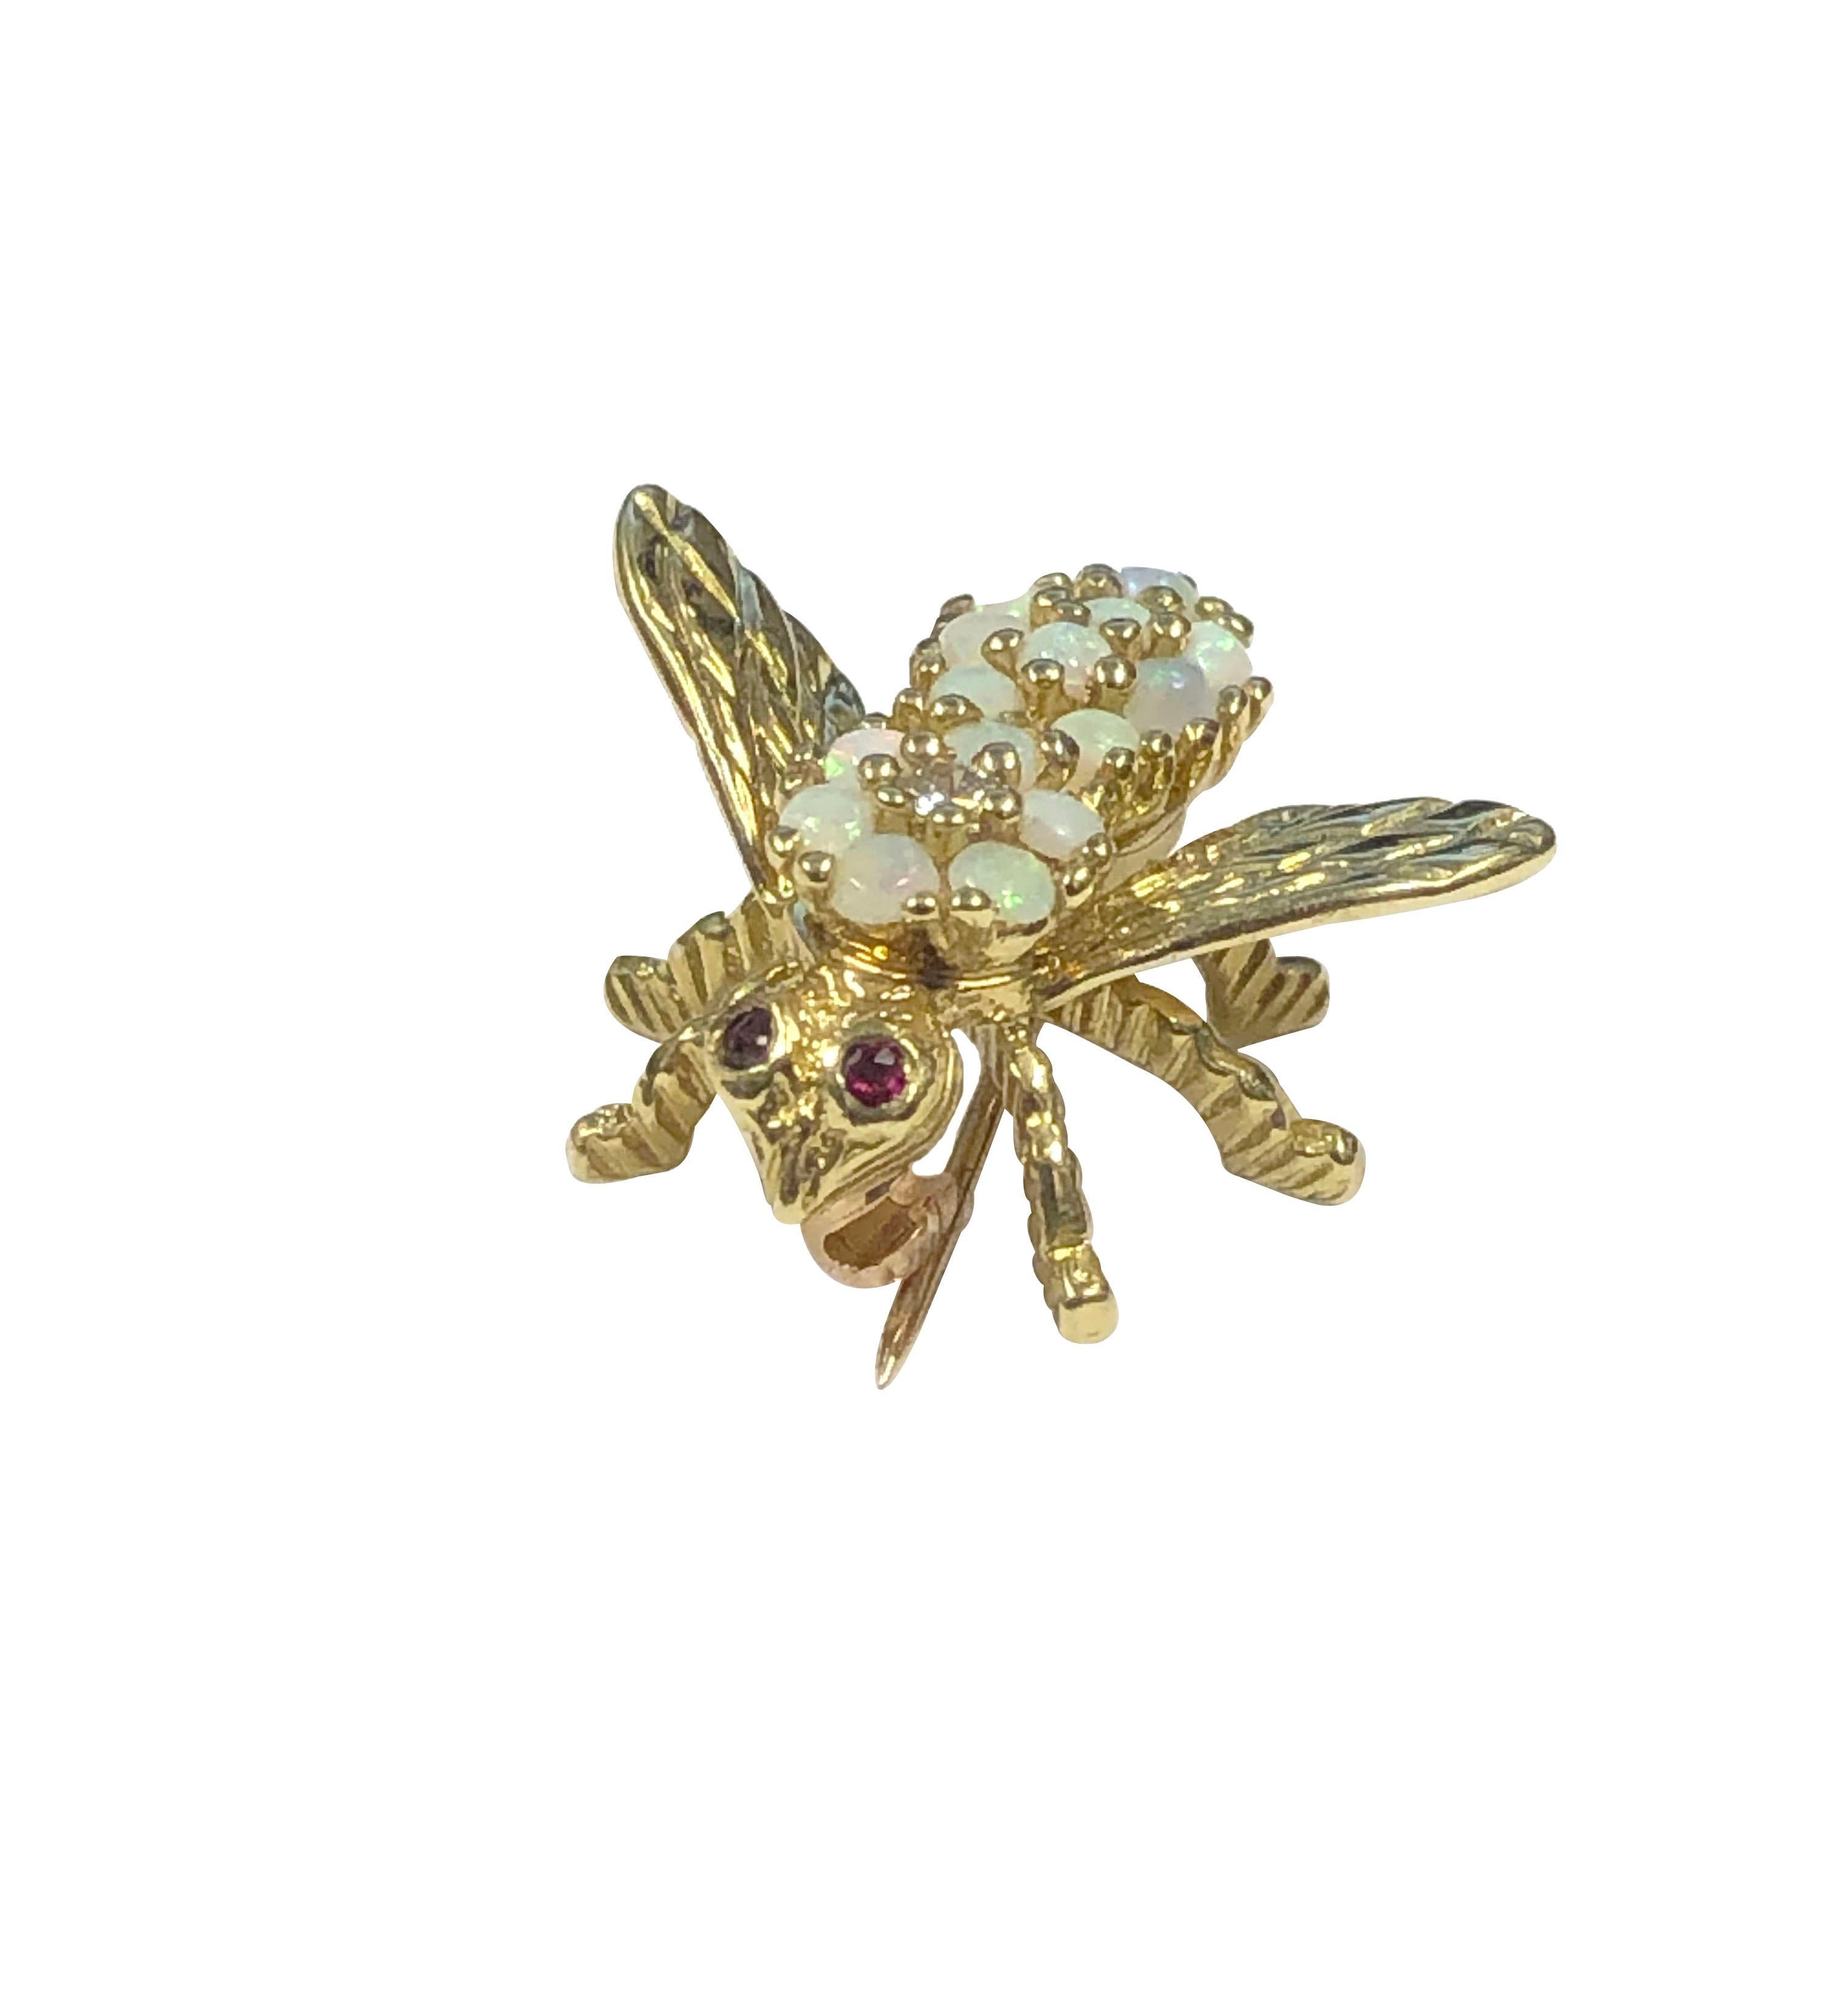 Circa 1960s Herbert Rosenthal 18k Yellow Gold Bee Brooch, measuring 5/8 inch in length X 3/4 inch wing tip to tip. Set with Opals, Diamond and Ruby set Eyes.  